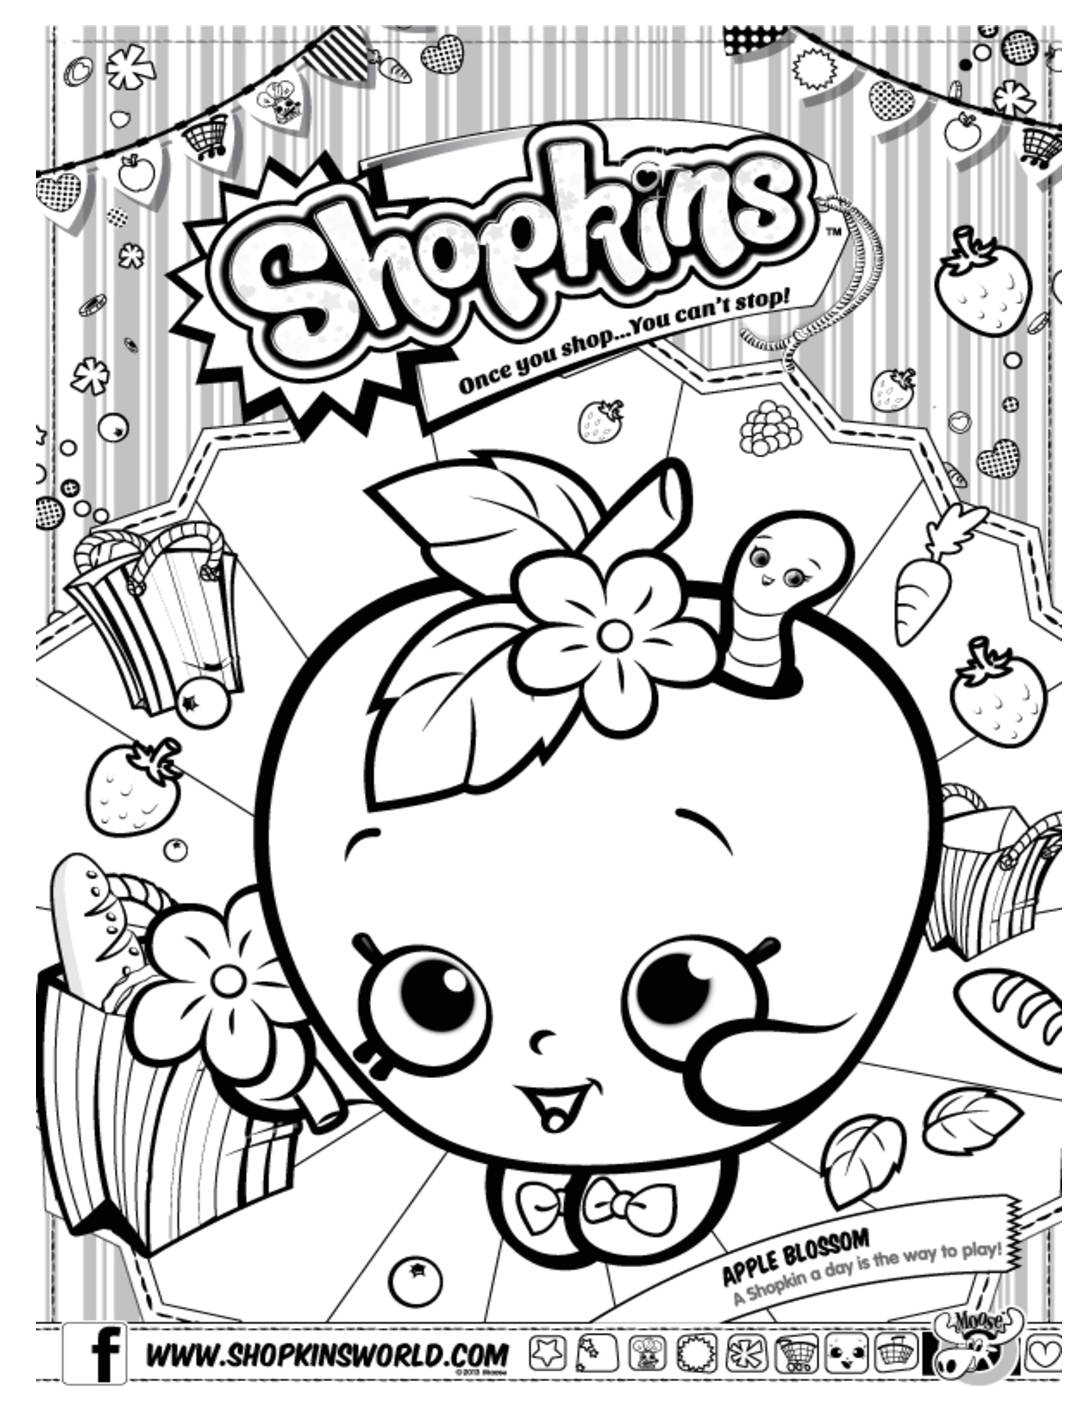 Shopkins Coloring Page 6